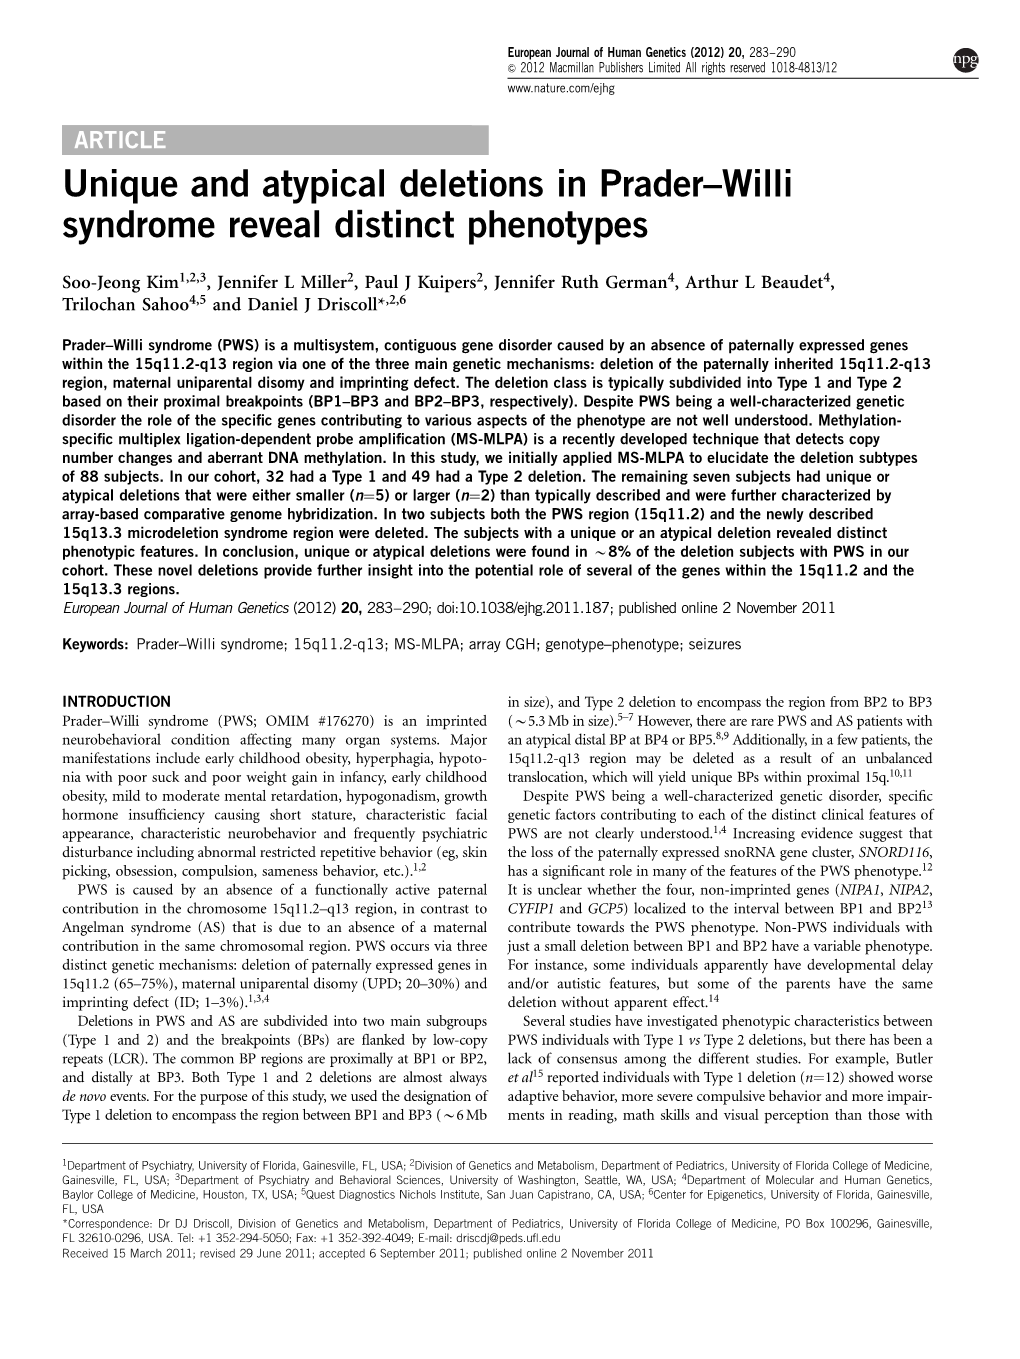 Unique and Atypical Deletions in Prader&Ndash;Willi Syndrome Reveal Distinct Phenotypes